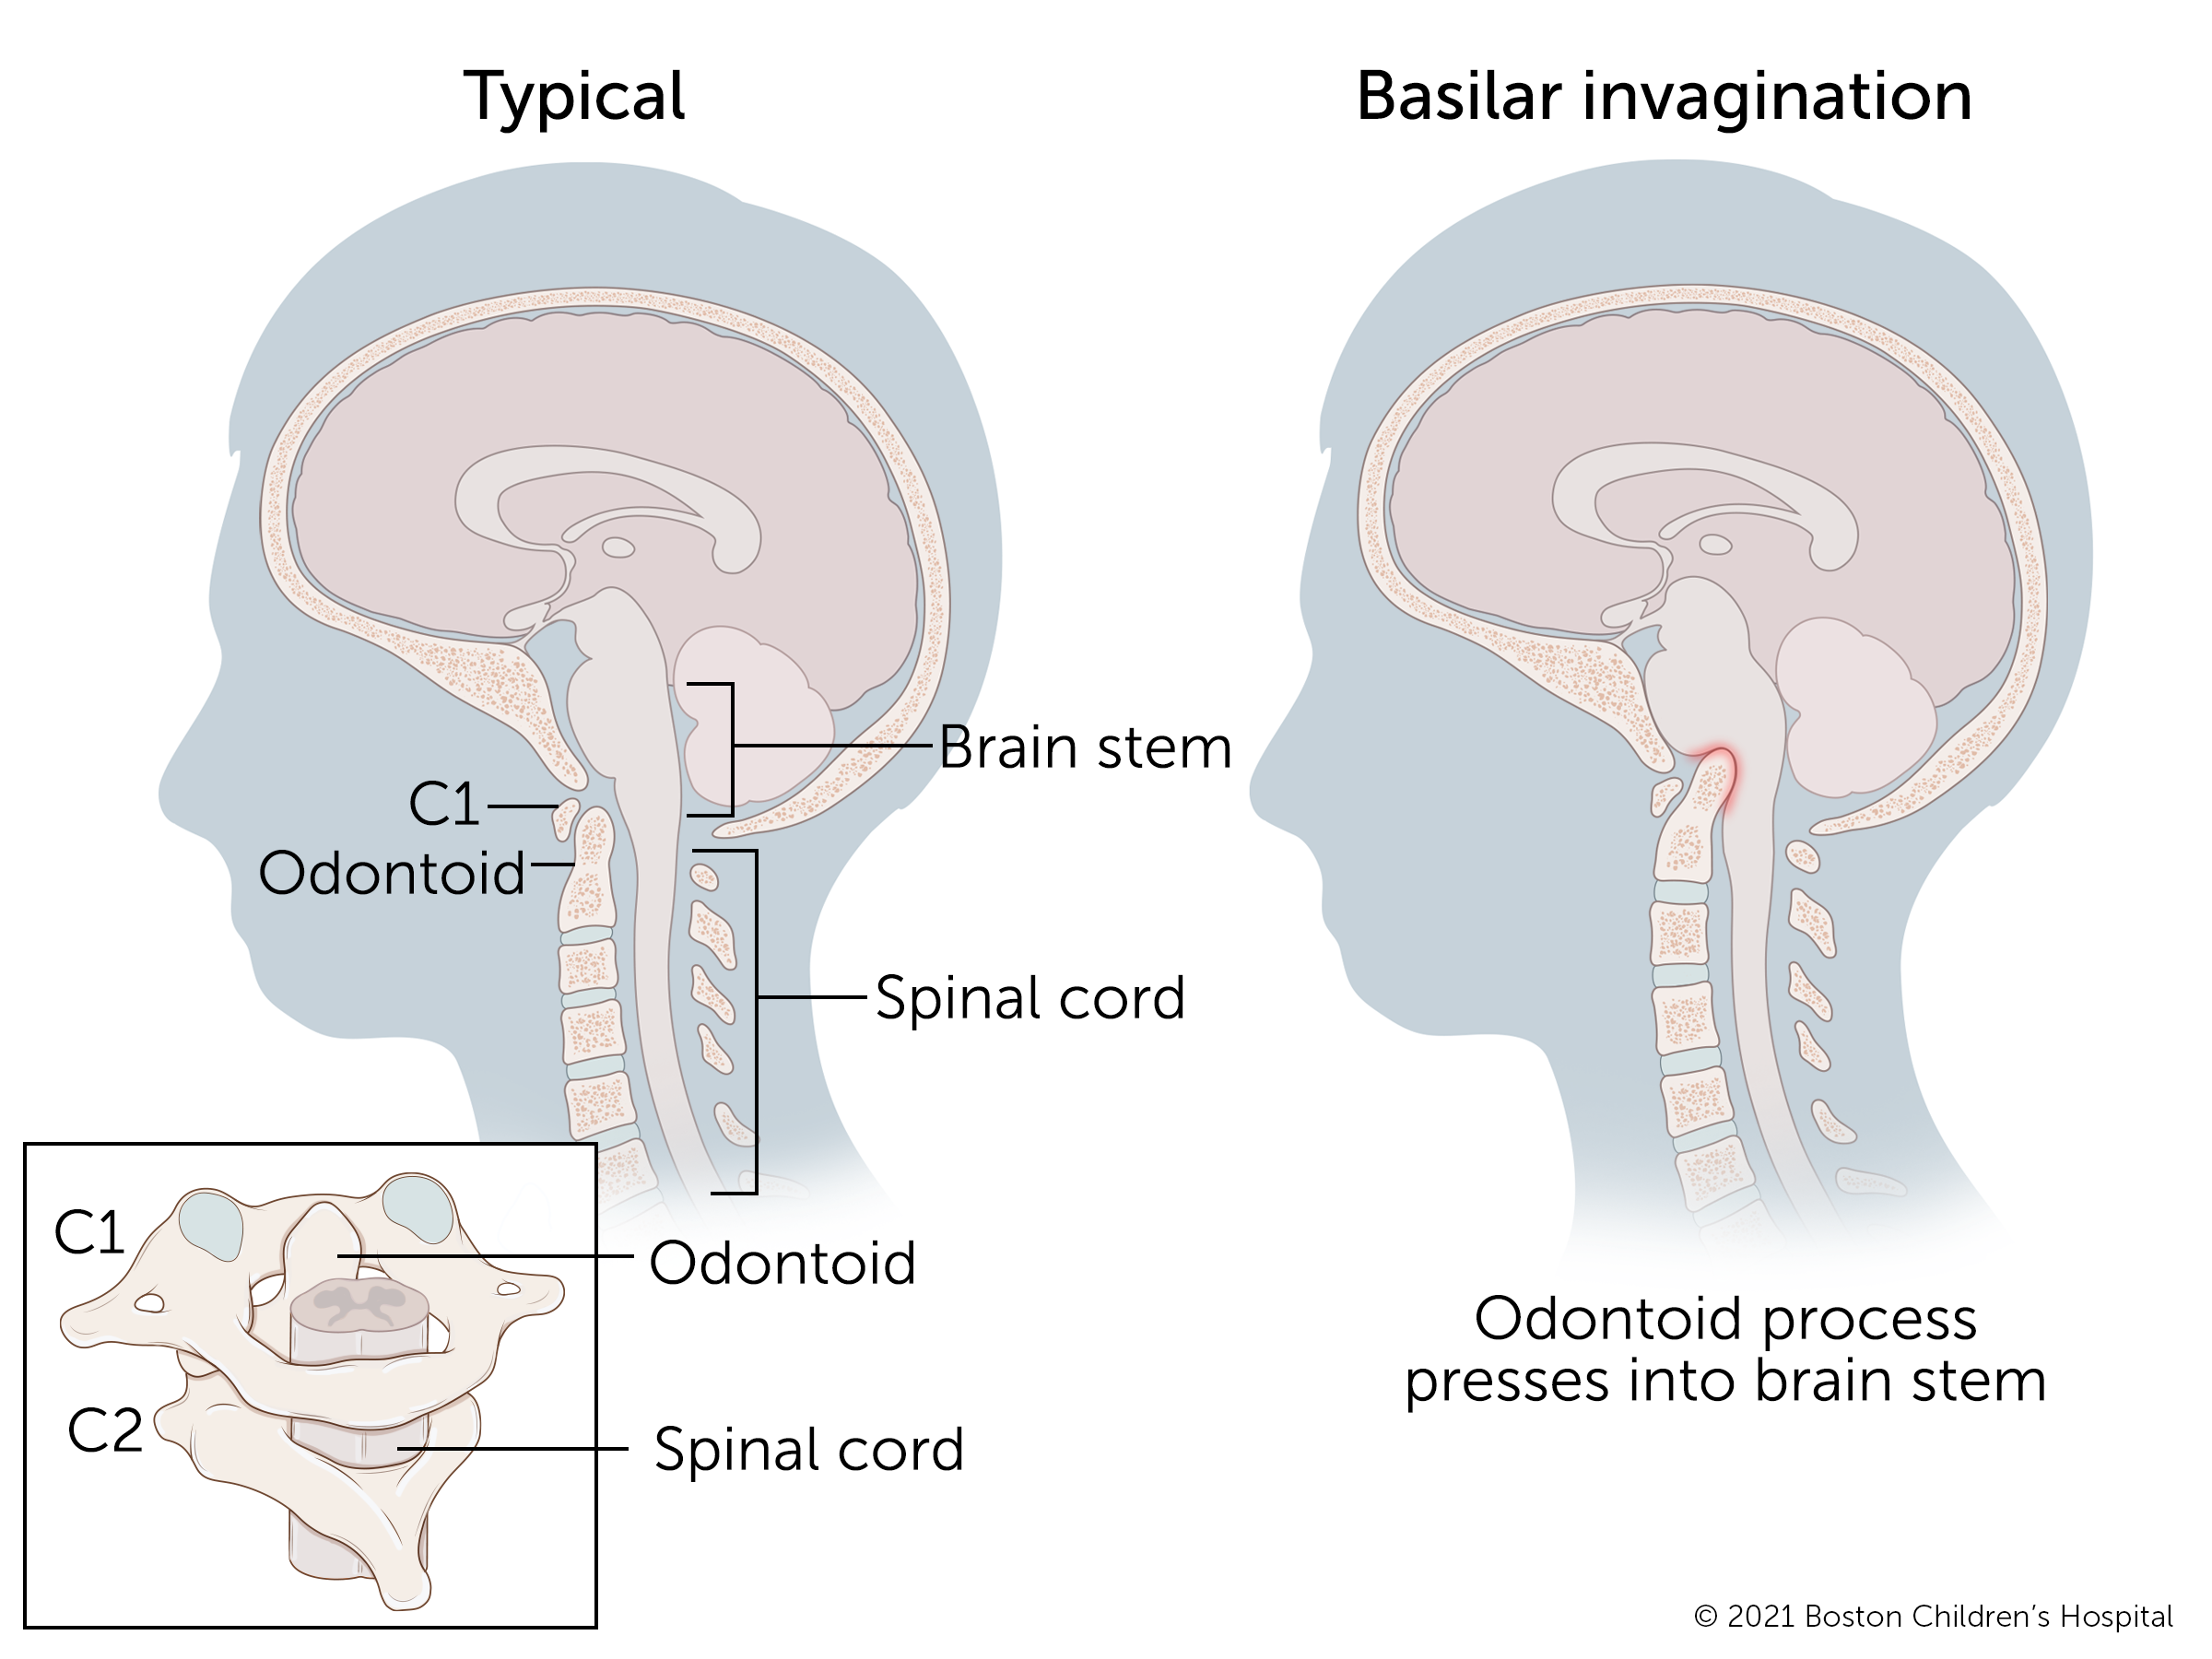 When a child has basilar invagination, a nob at the top of their spine presses into their brain stem.